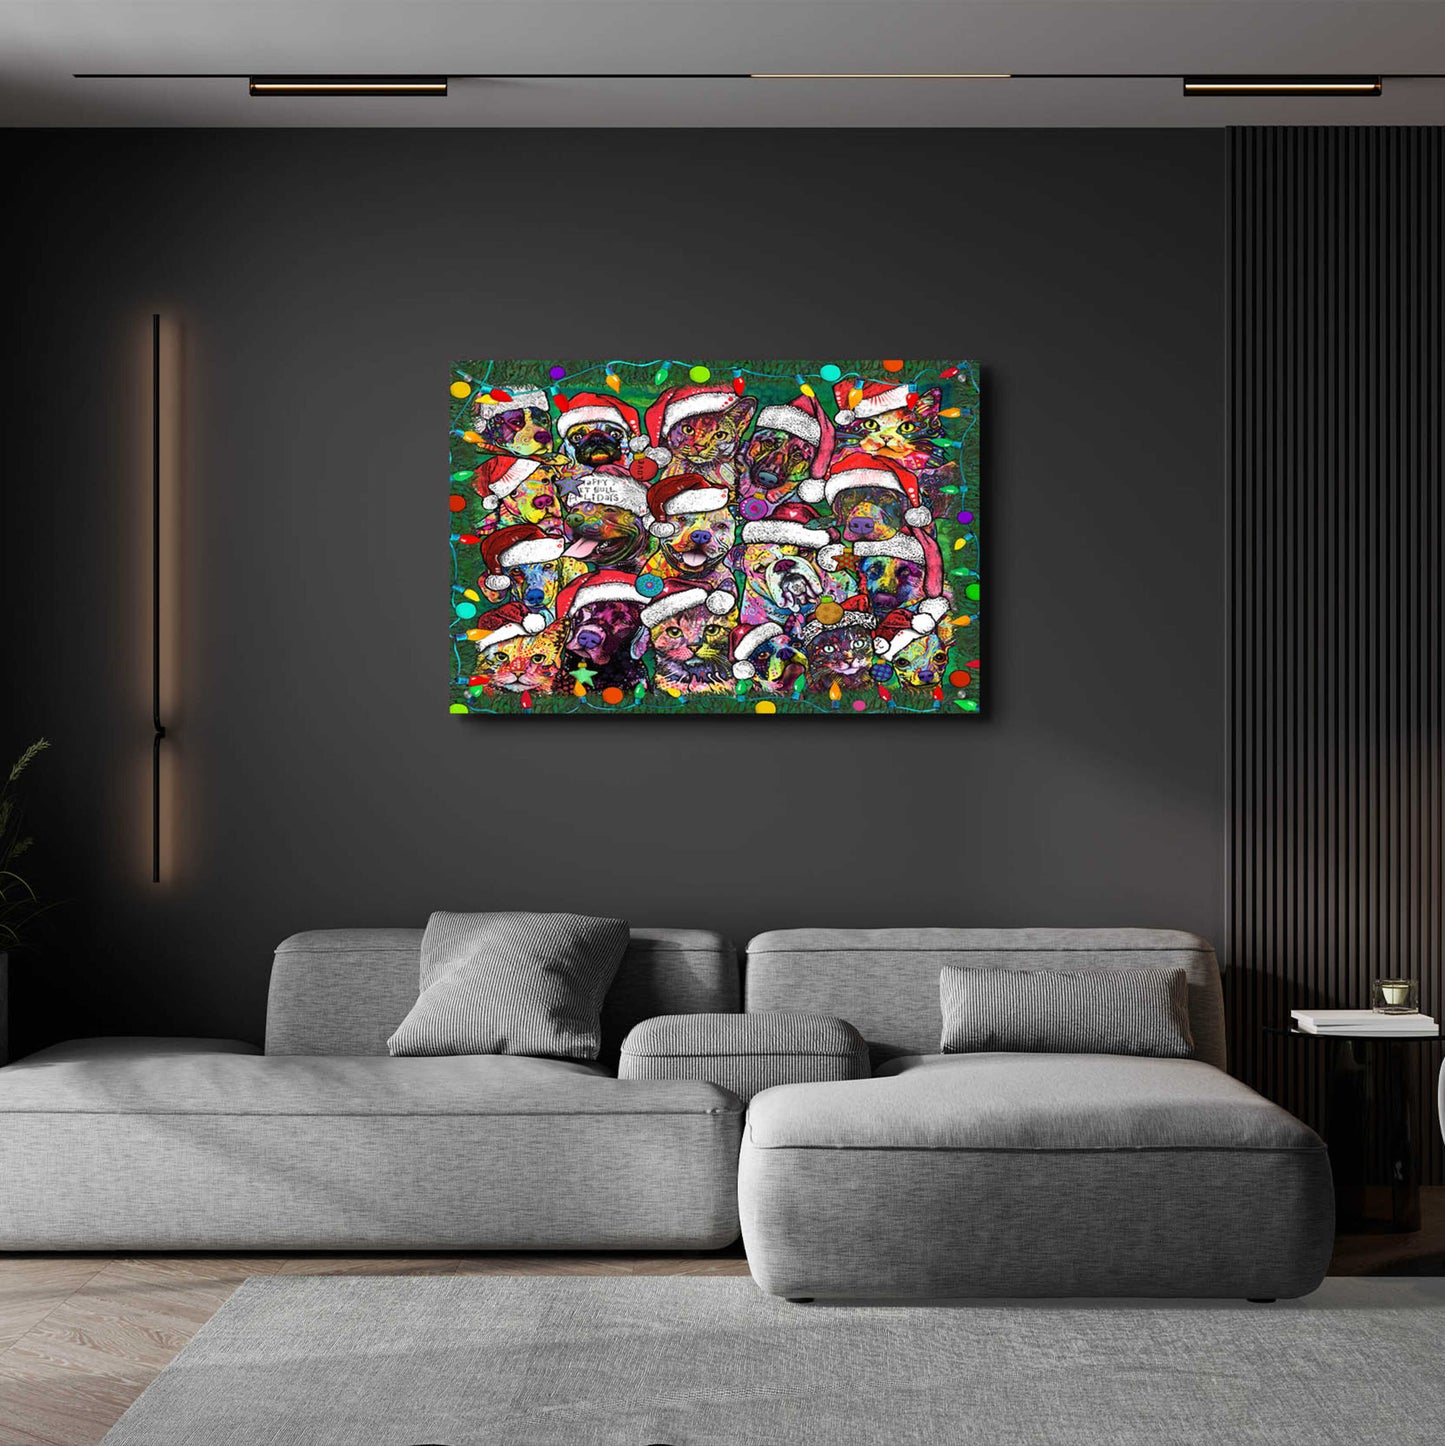 Epic Art 'Christmas Collage' by Dean Russo, Acrylic Glass Wall Art,36x24